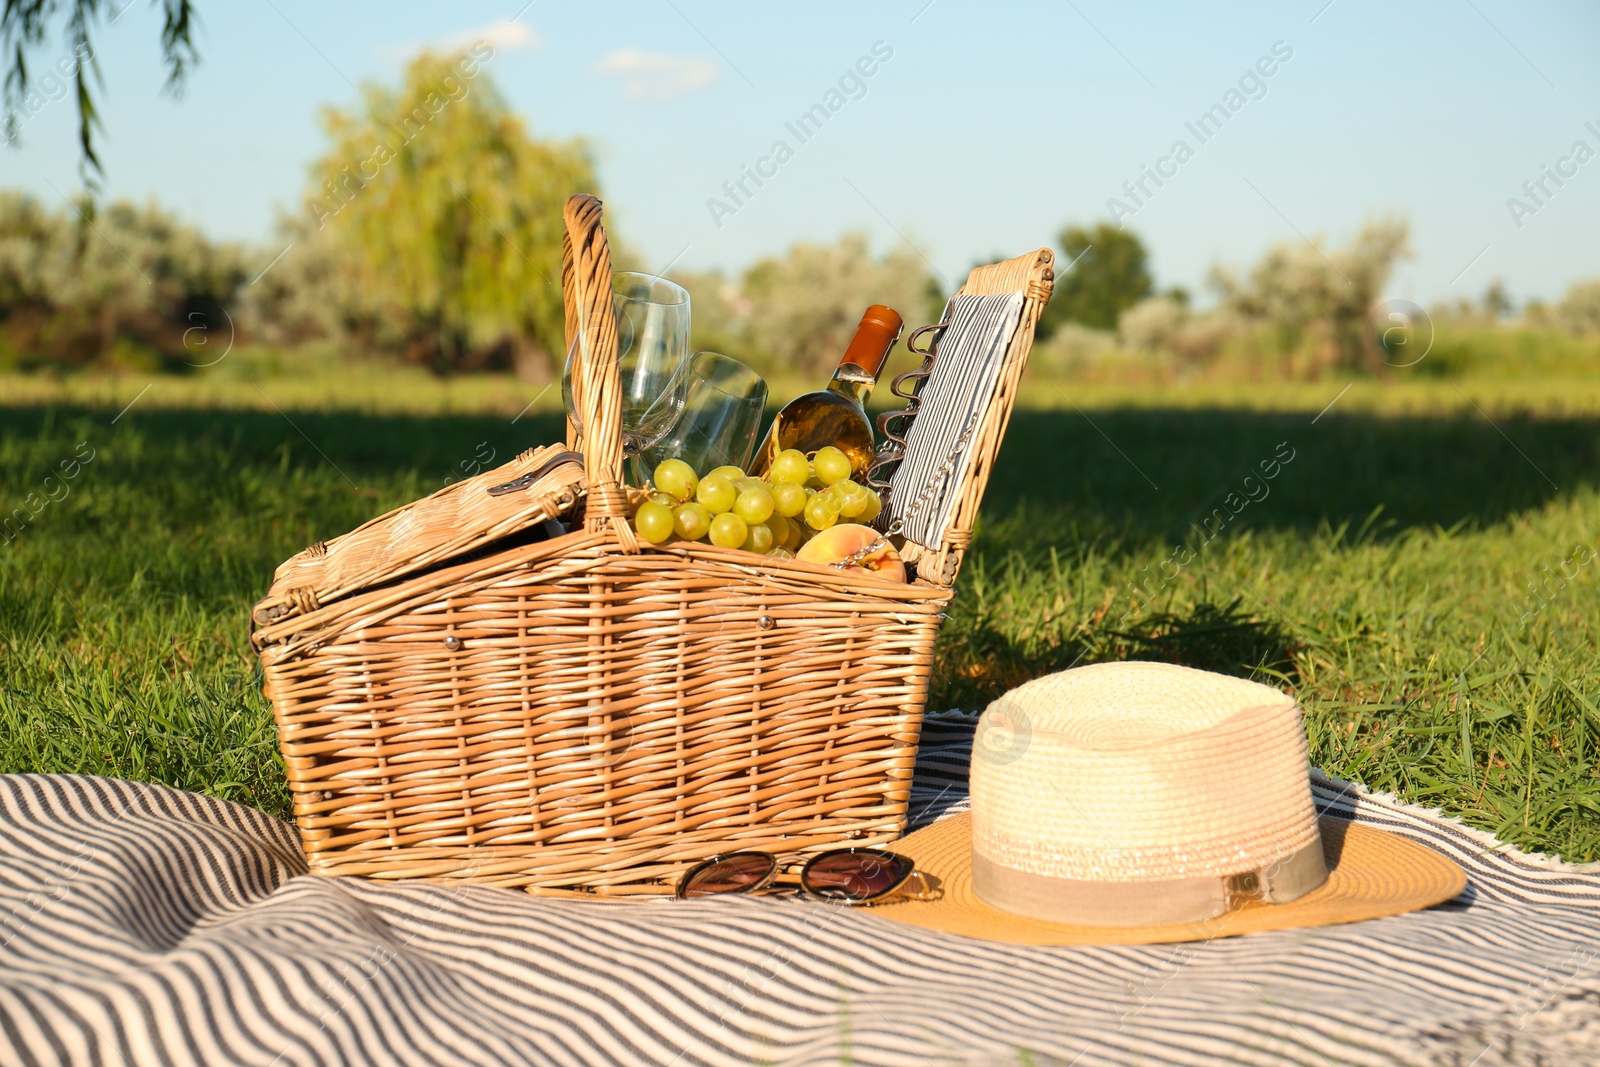 Photo of Picnic basket with snacks and bottle of wine on blanket in park